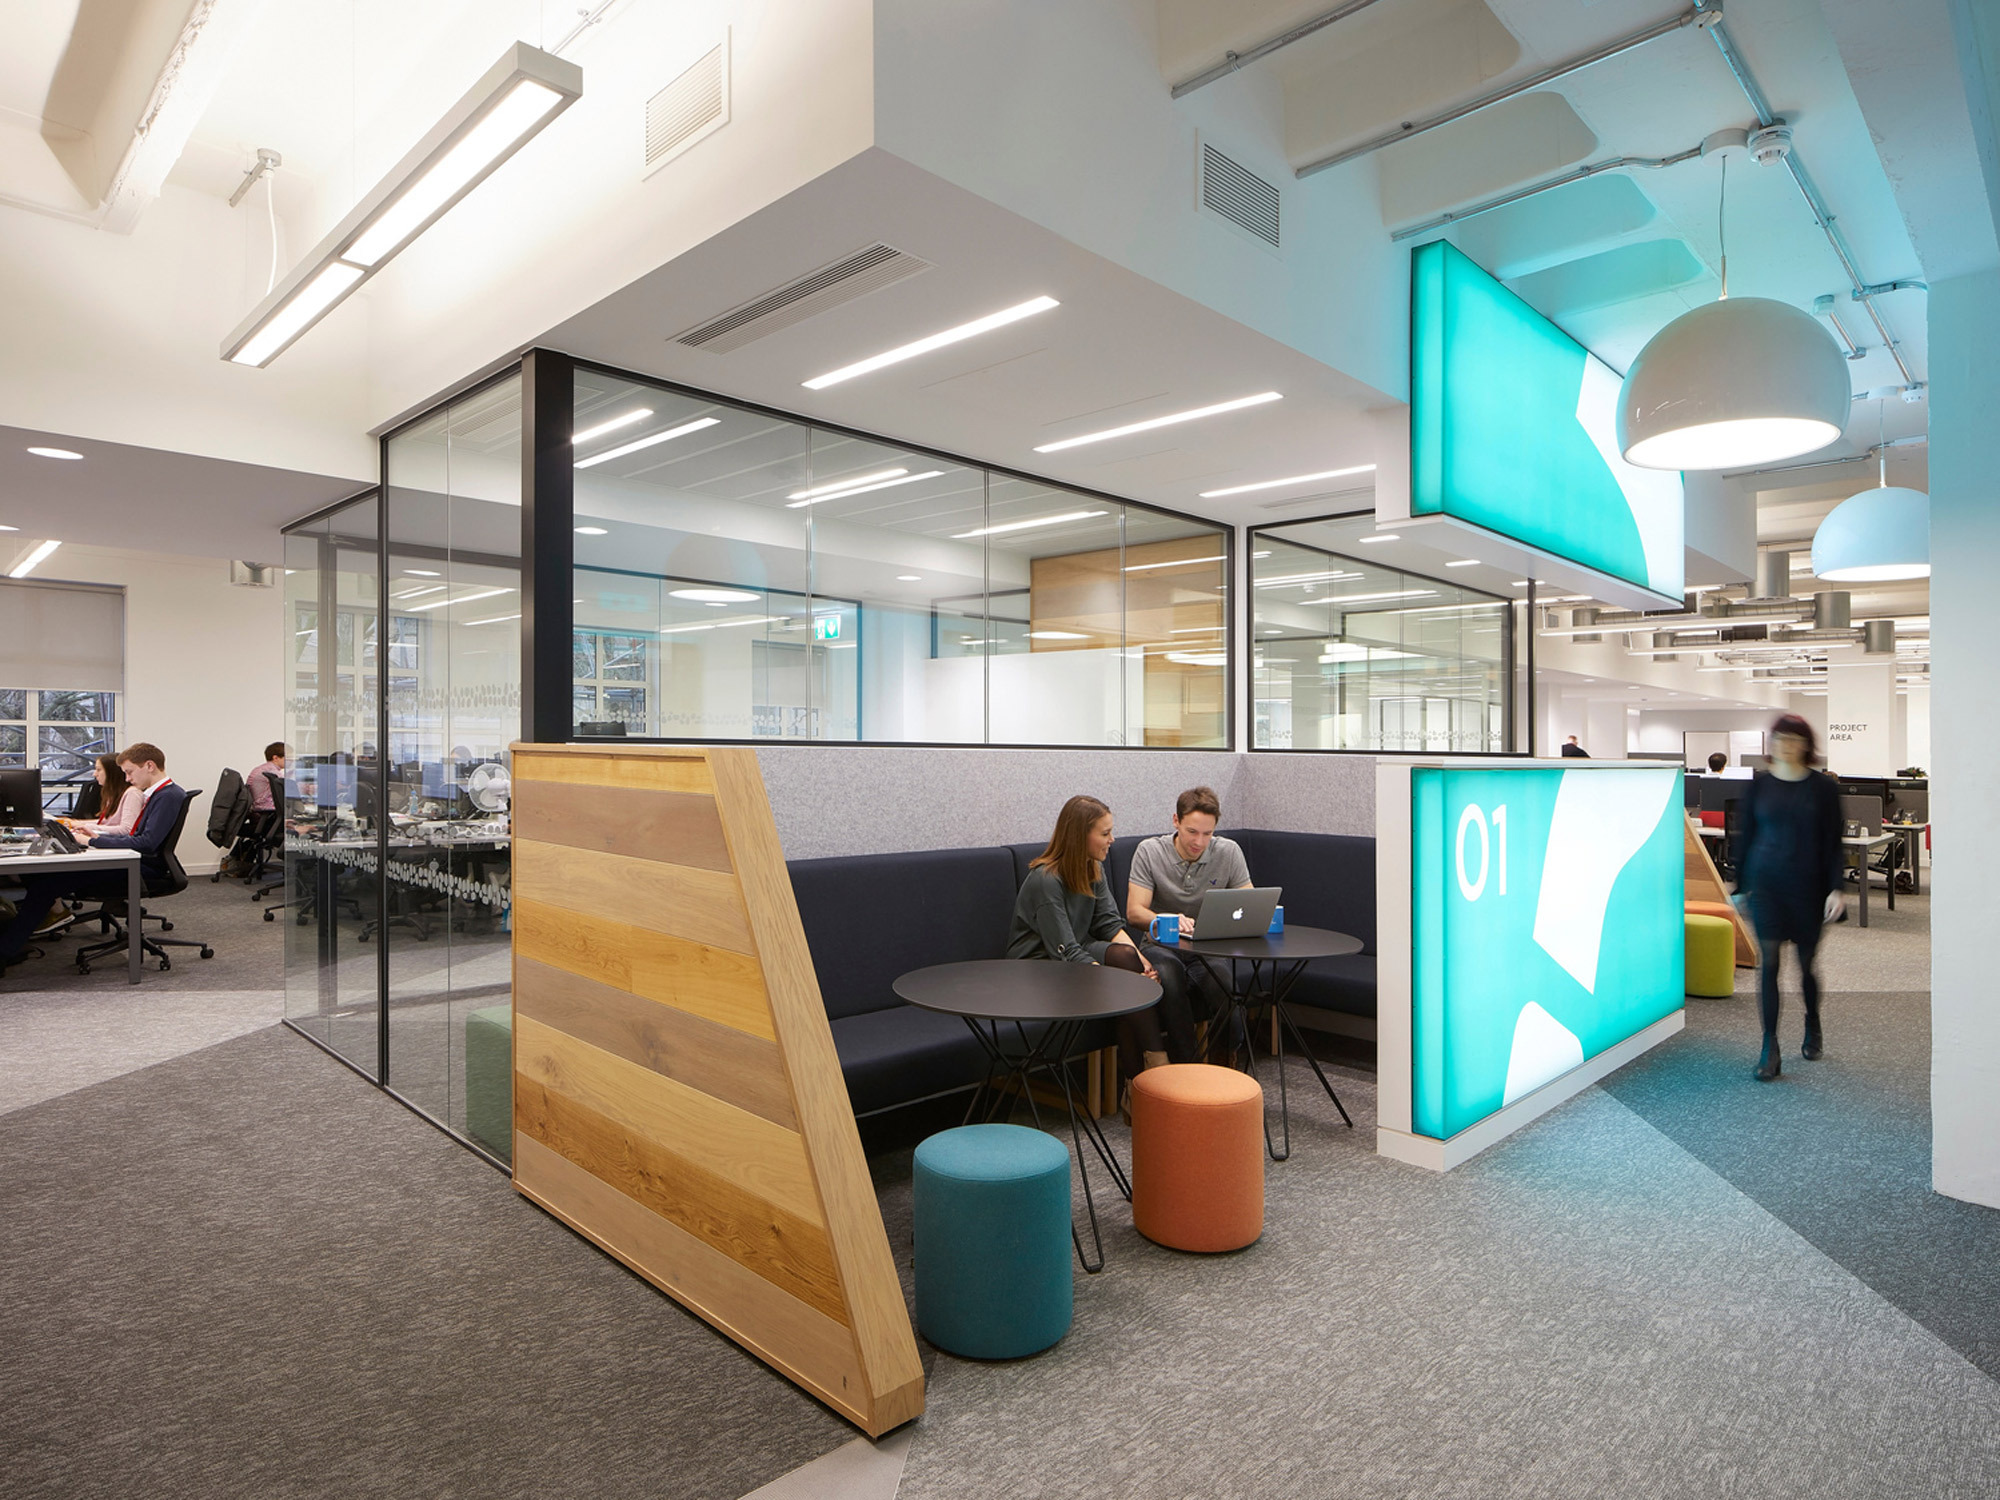 Modern office space featuring glass partition walls, an informal meeting area with colorful poufs, and dynamic lighting. A bold, illuminated numeral adds a creative touch, while employees work at clustered desks in the background.